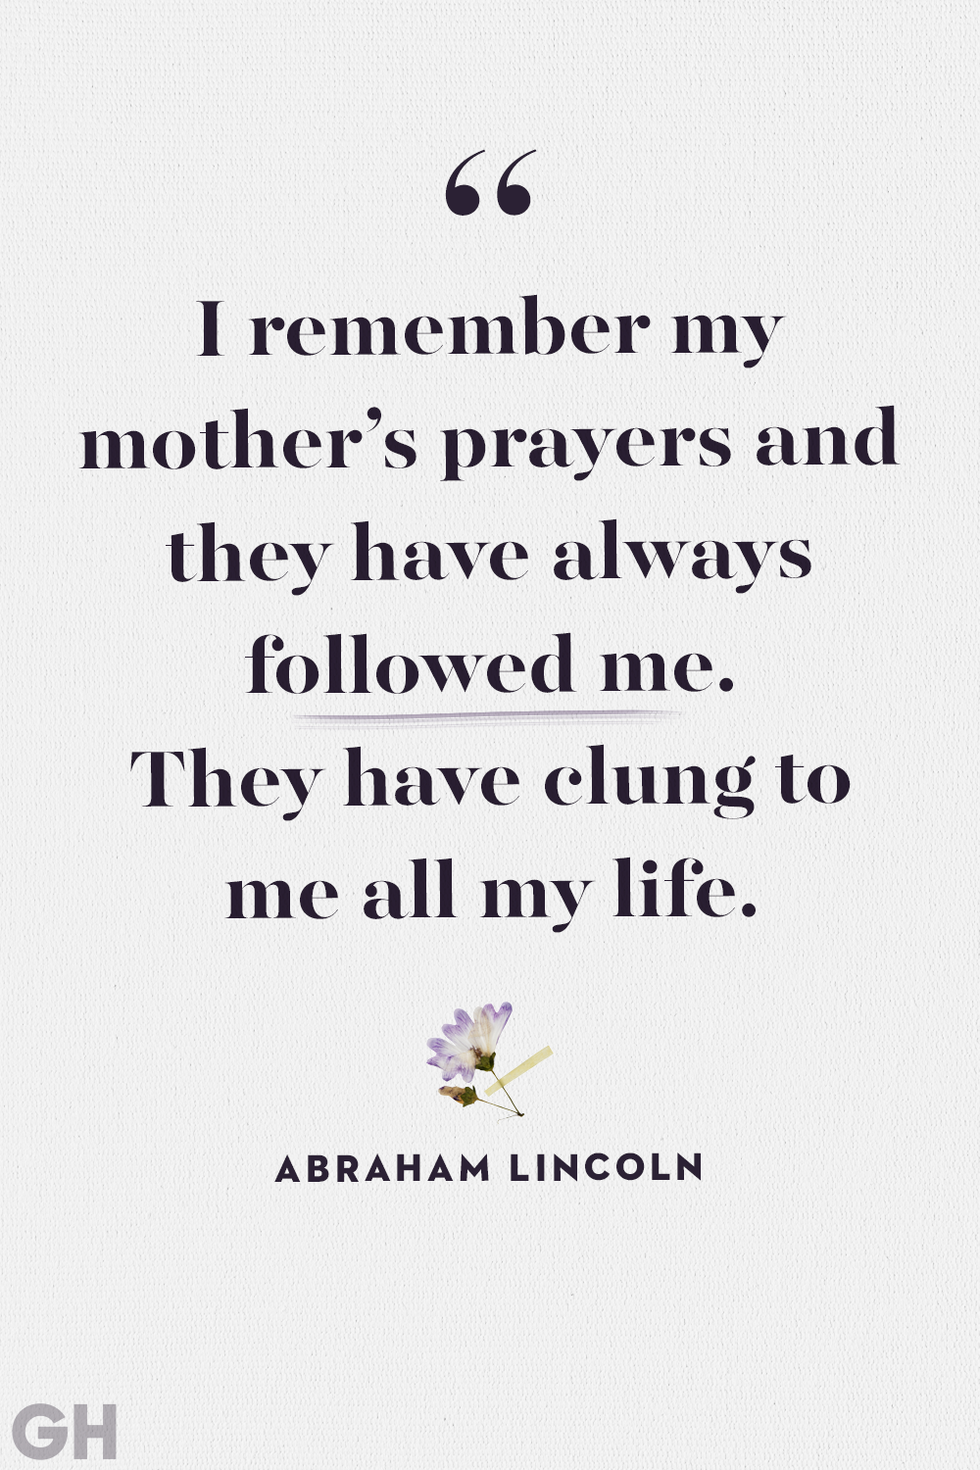 i remember my mother's prayers and they have always followed me they have clung to me all my life